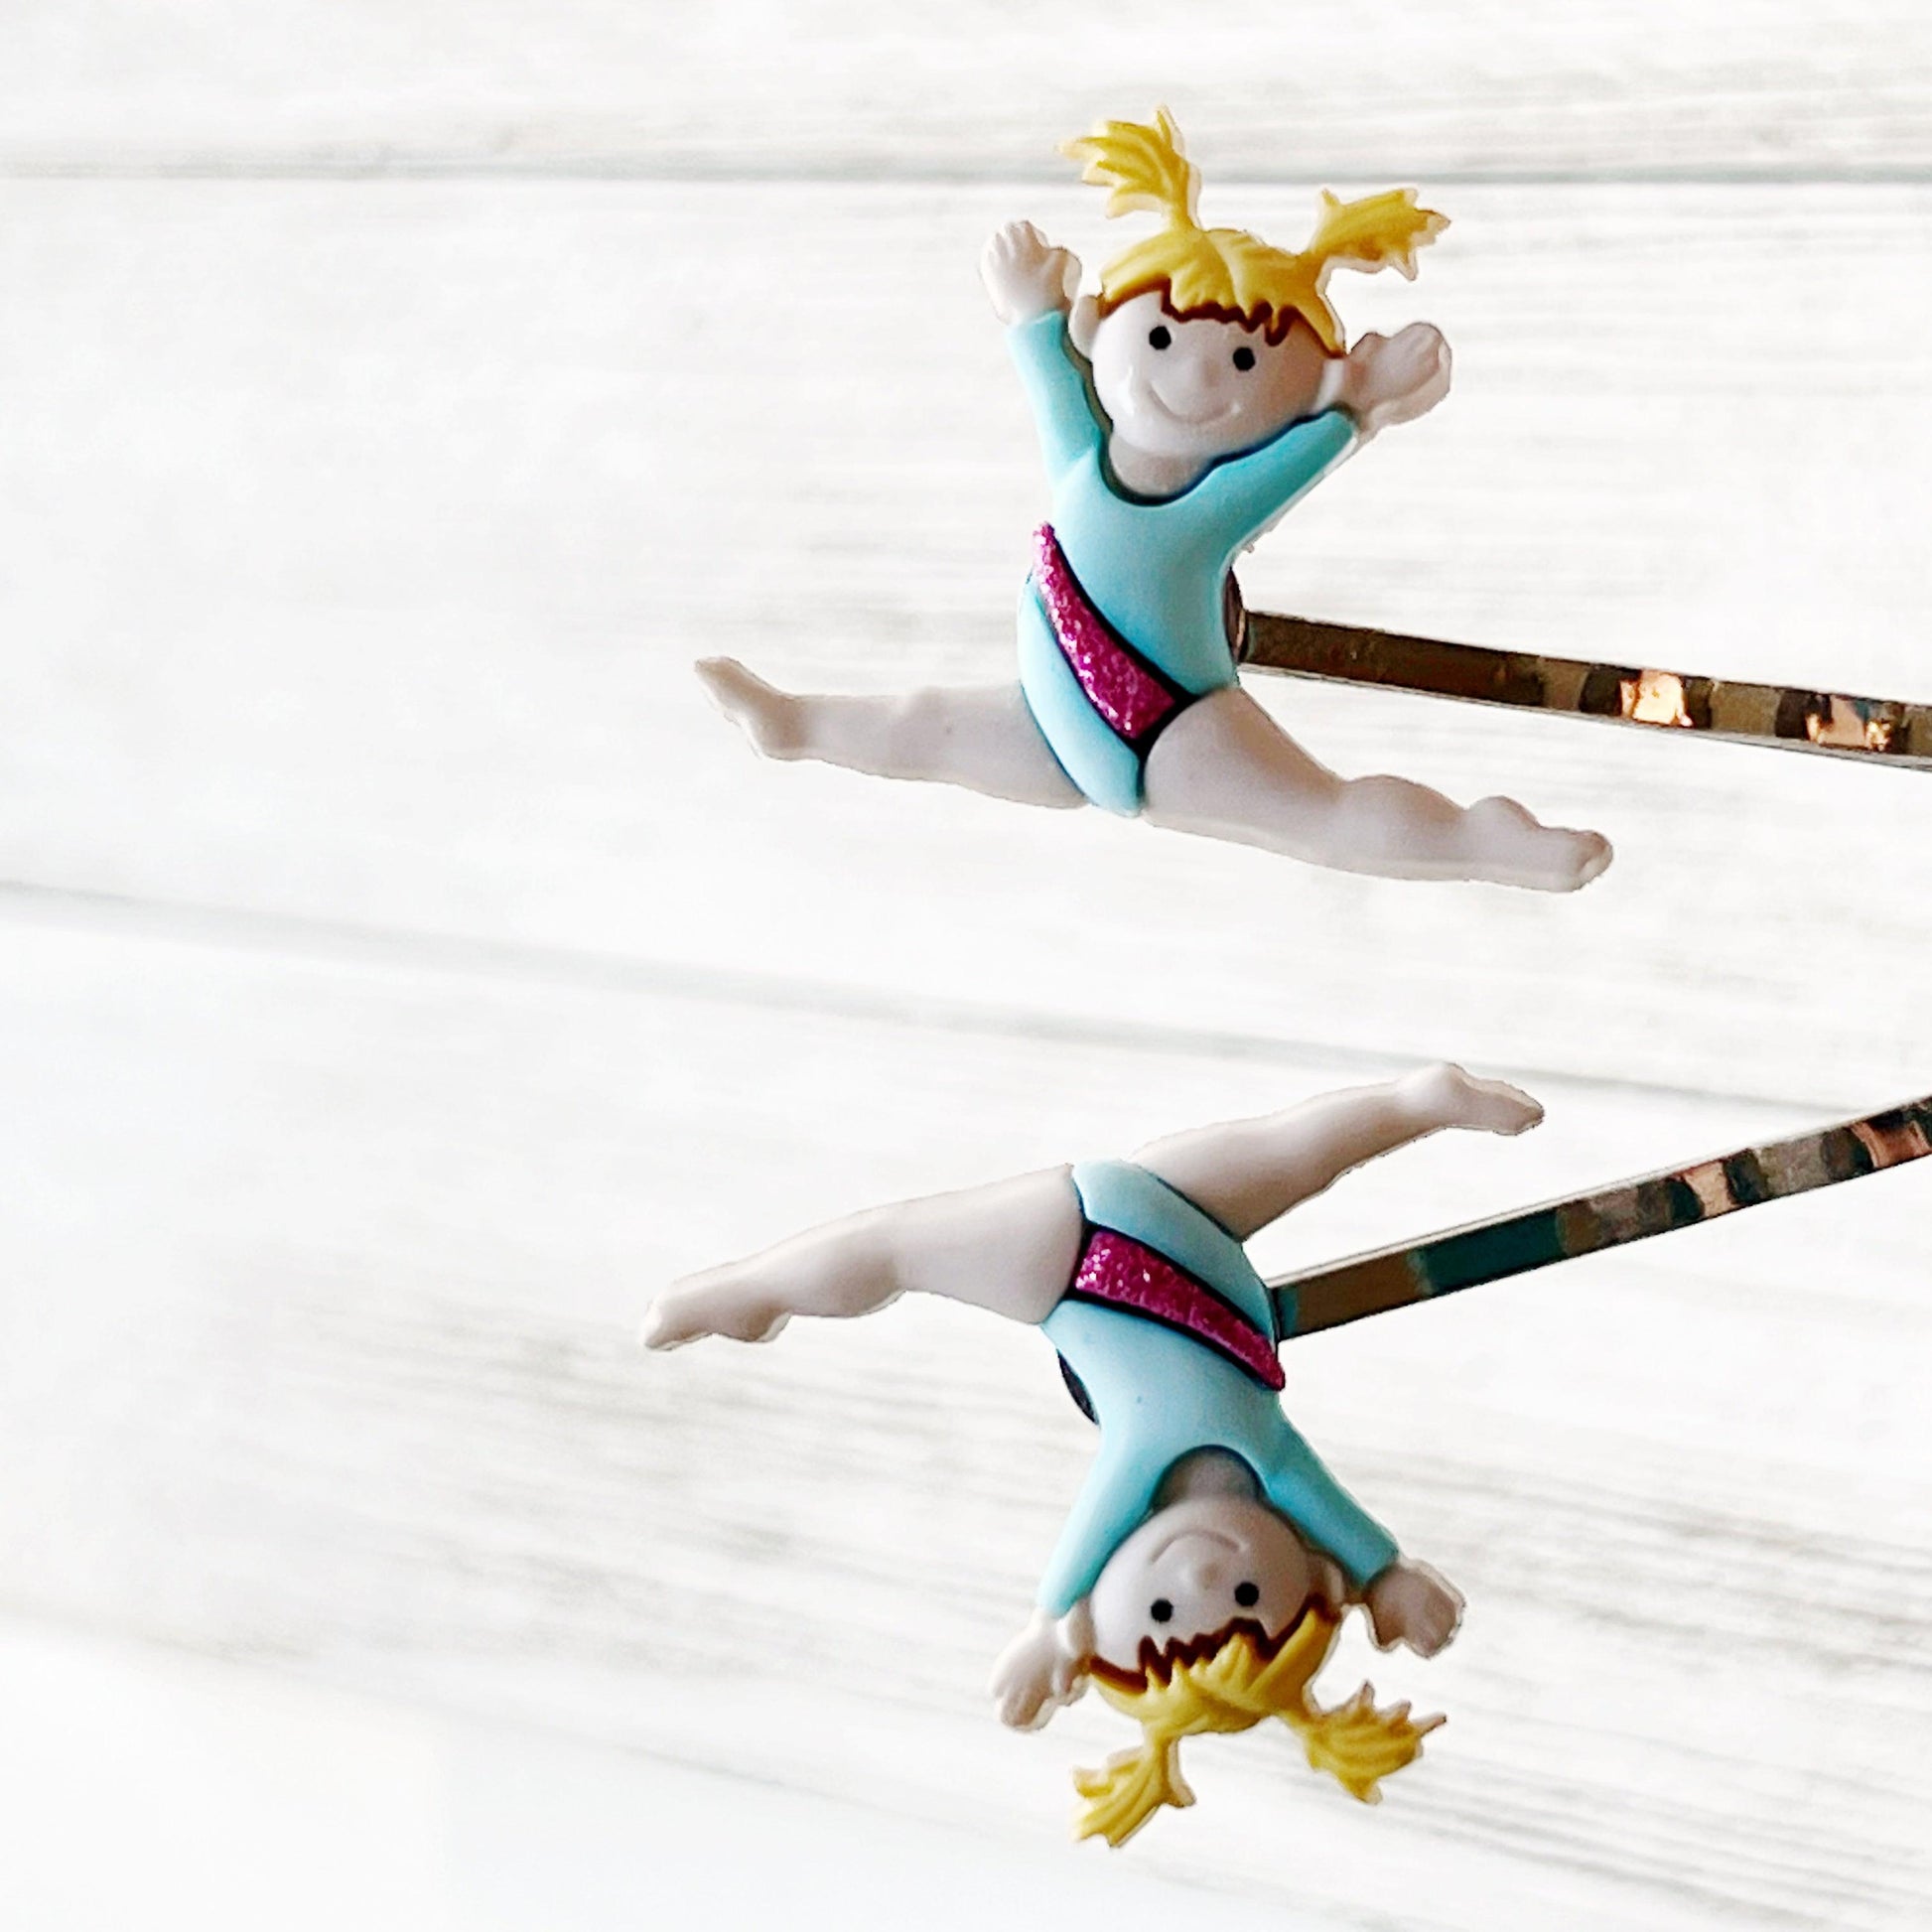 Set of 2 Hair Pins with Gymnasts - Cheerful Accessories for Gymnastics Enthusiasts